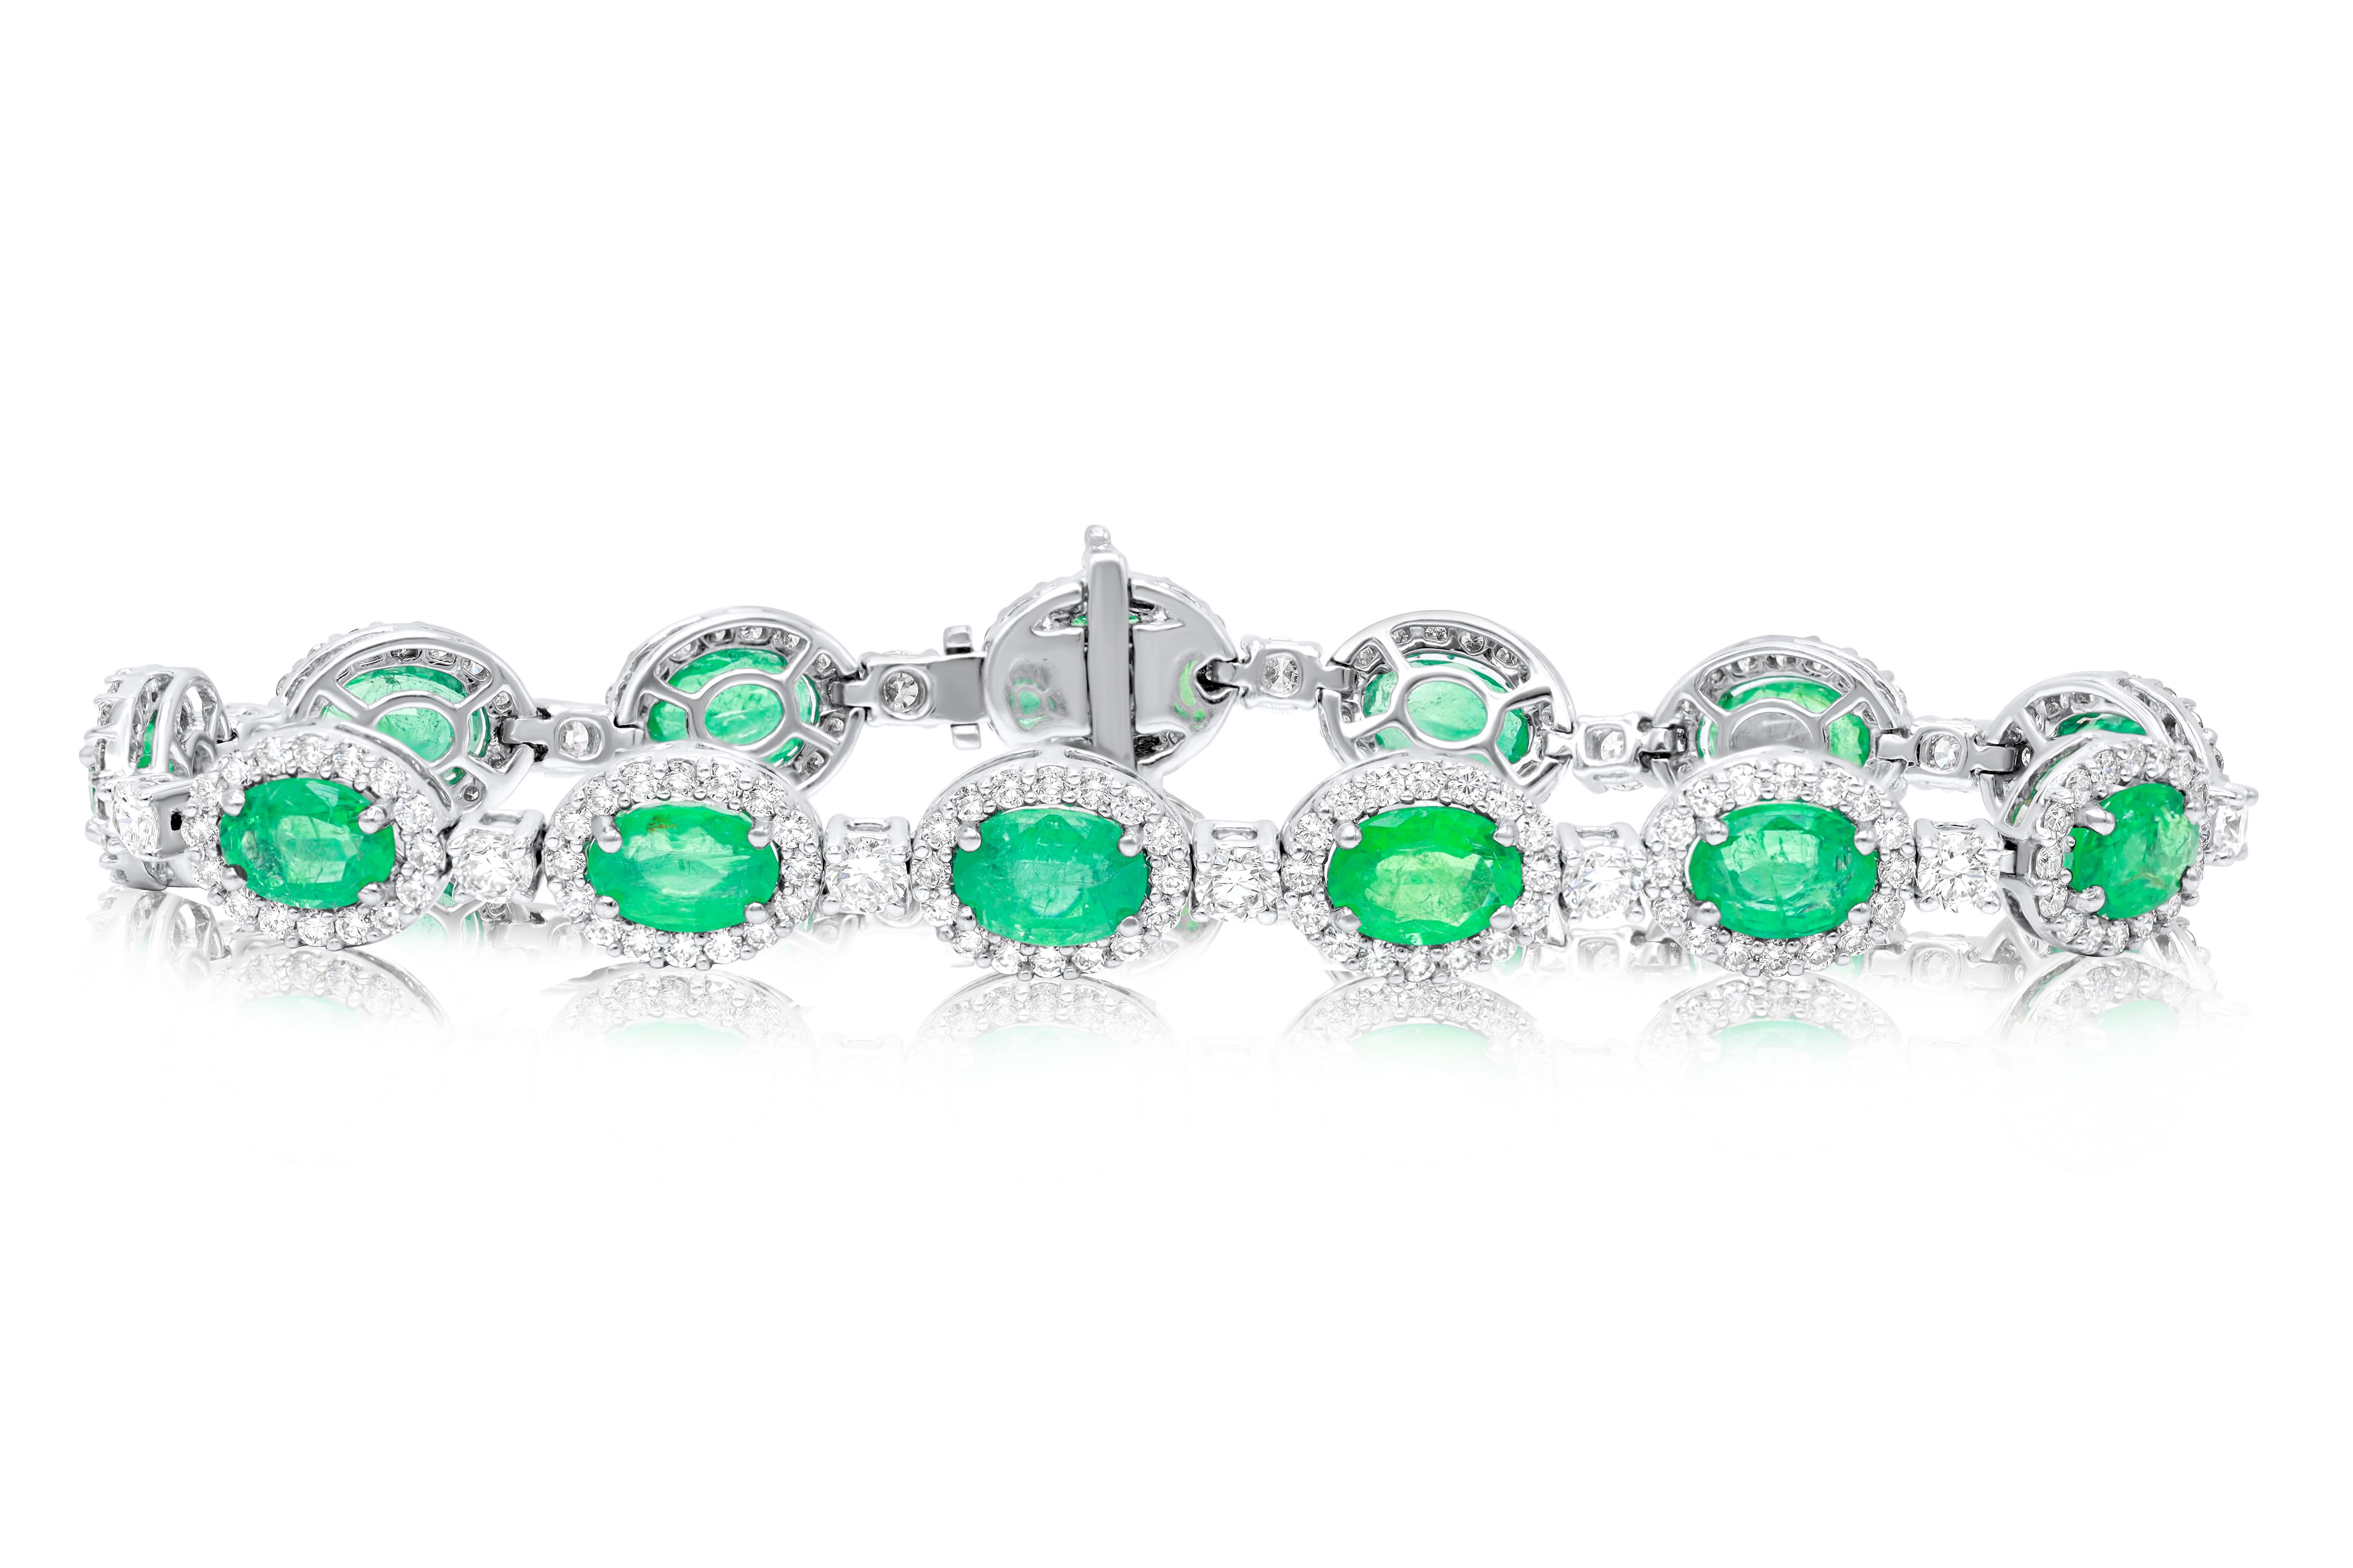 18 kt white gold bracelet adorned with 9.68 cts tw of oval cut green emeralds surrounded and separated by 4.07 cts tw of diamonds